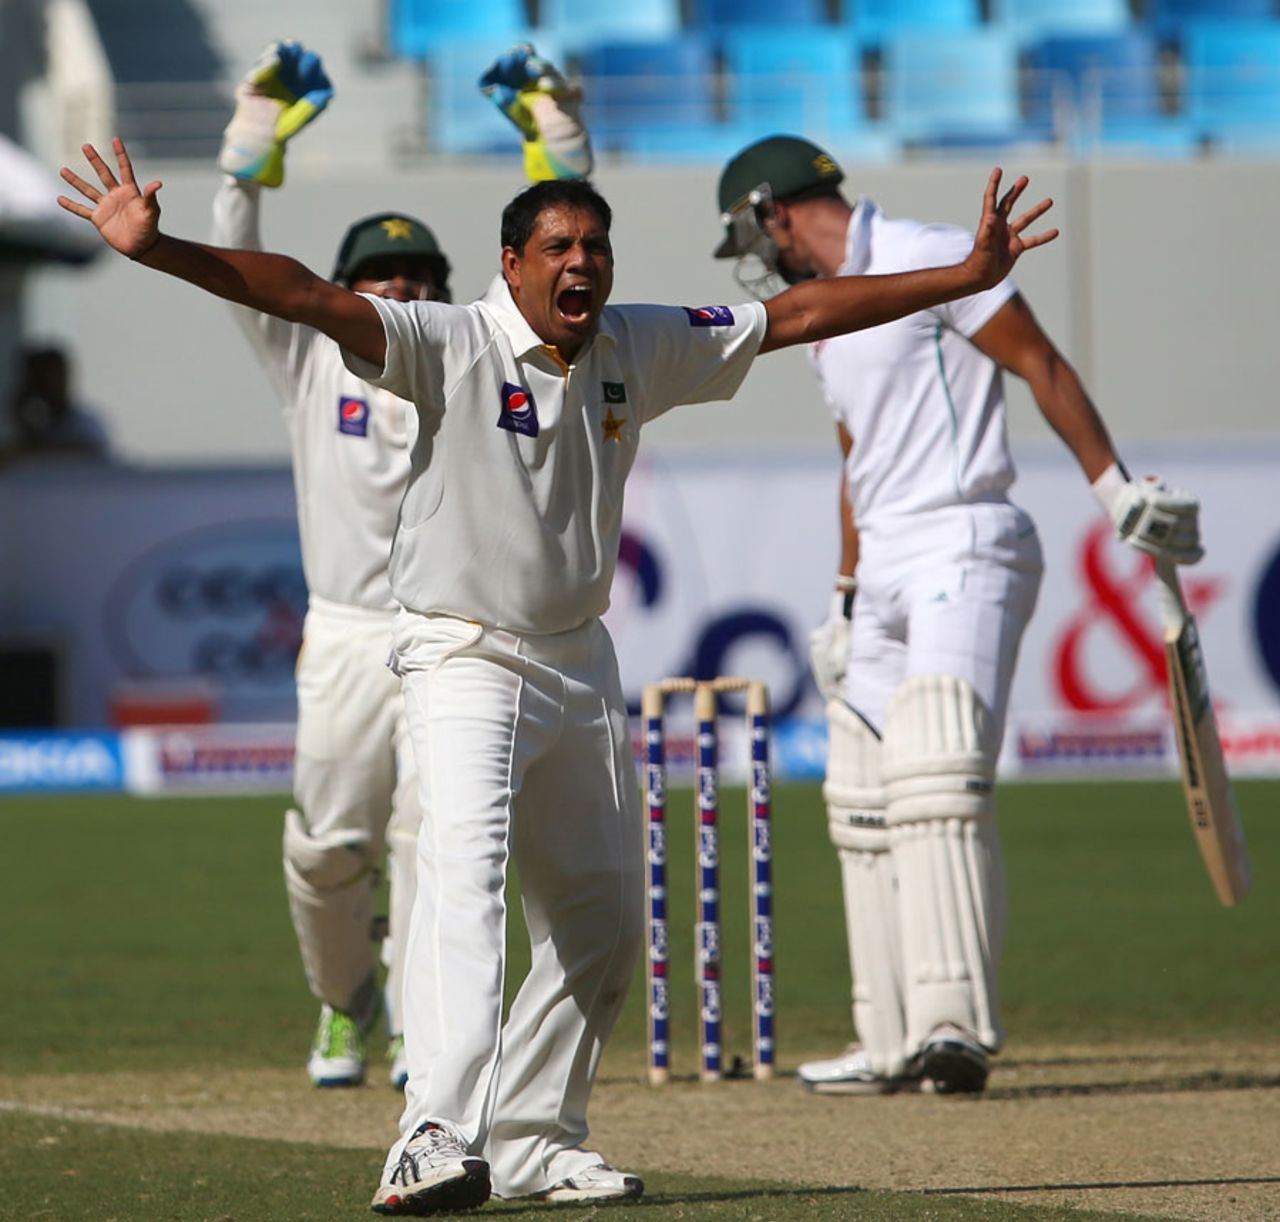 Zulfiqar Babar successfully appeals for the wicket of Alviro Petersen, Pakistan v South Africa, 2nd Test, 1st day, Dubai, October 23, 2013